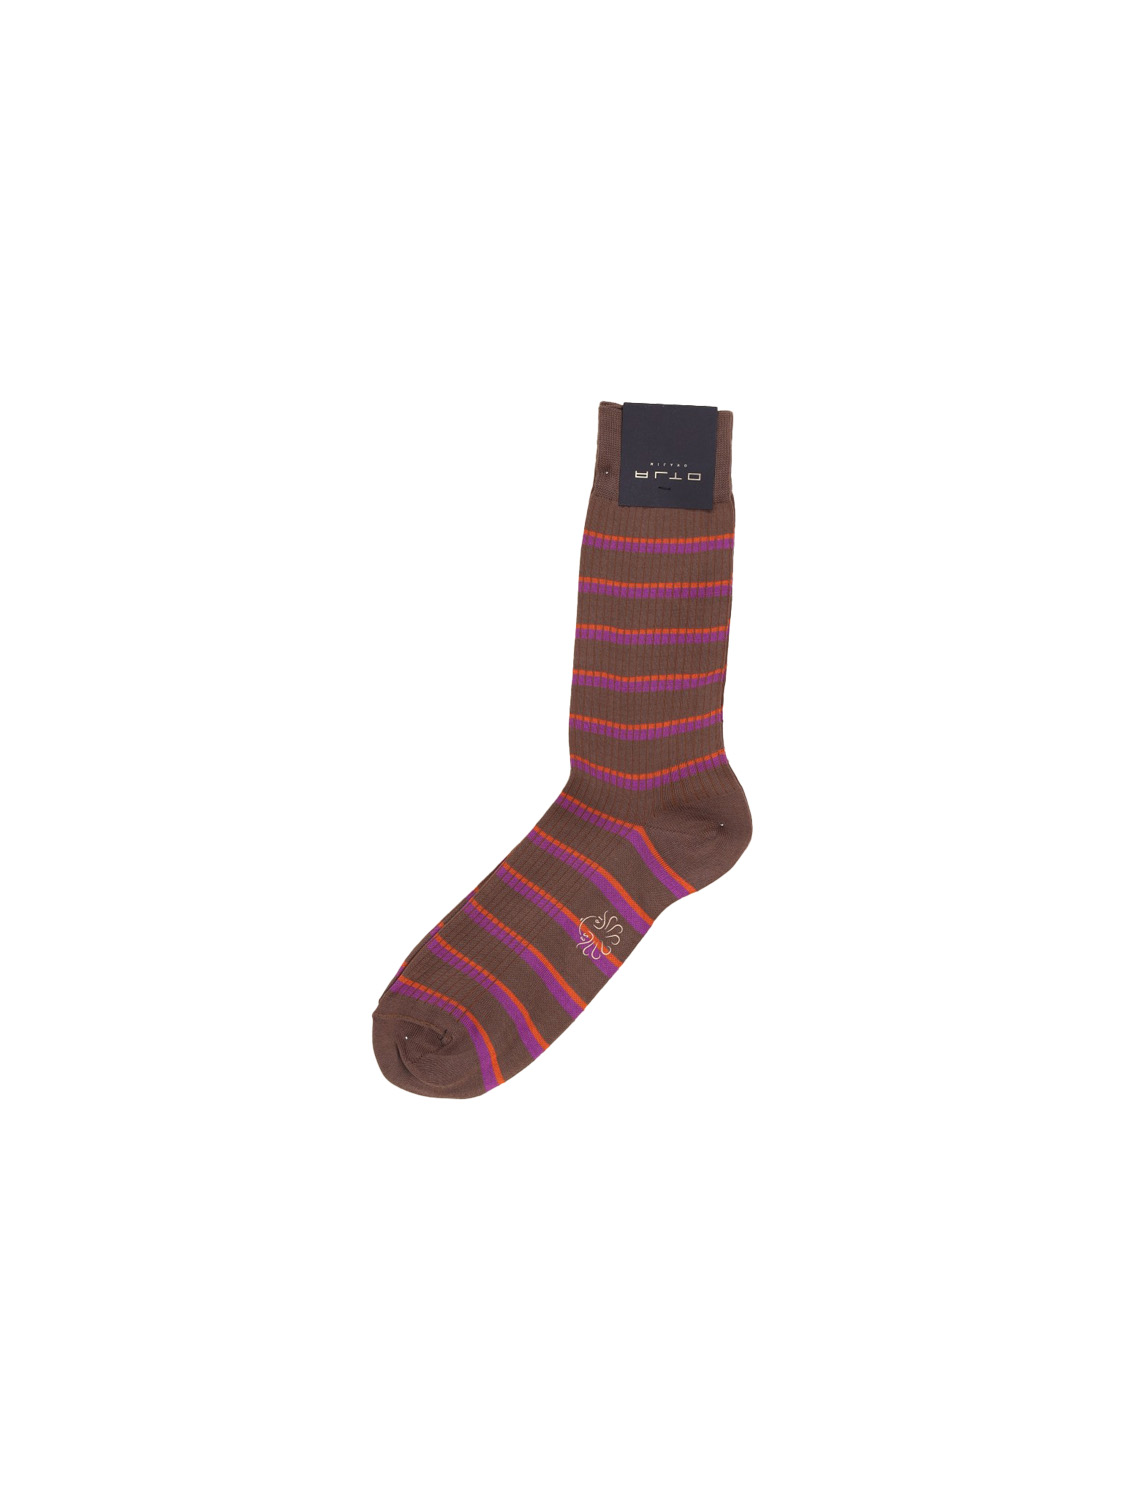 Alto Molier short cotton socks with striped pattern  price One Size